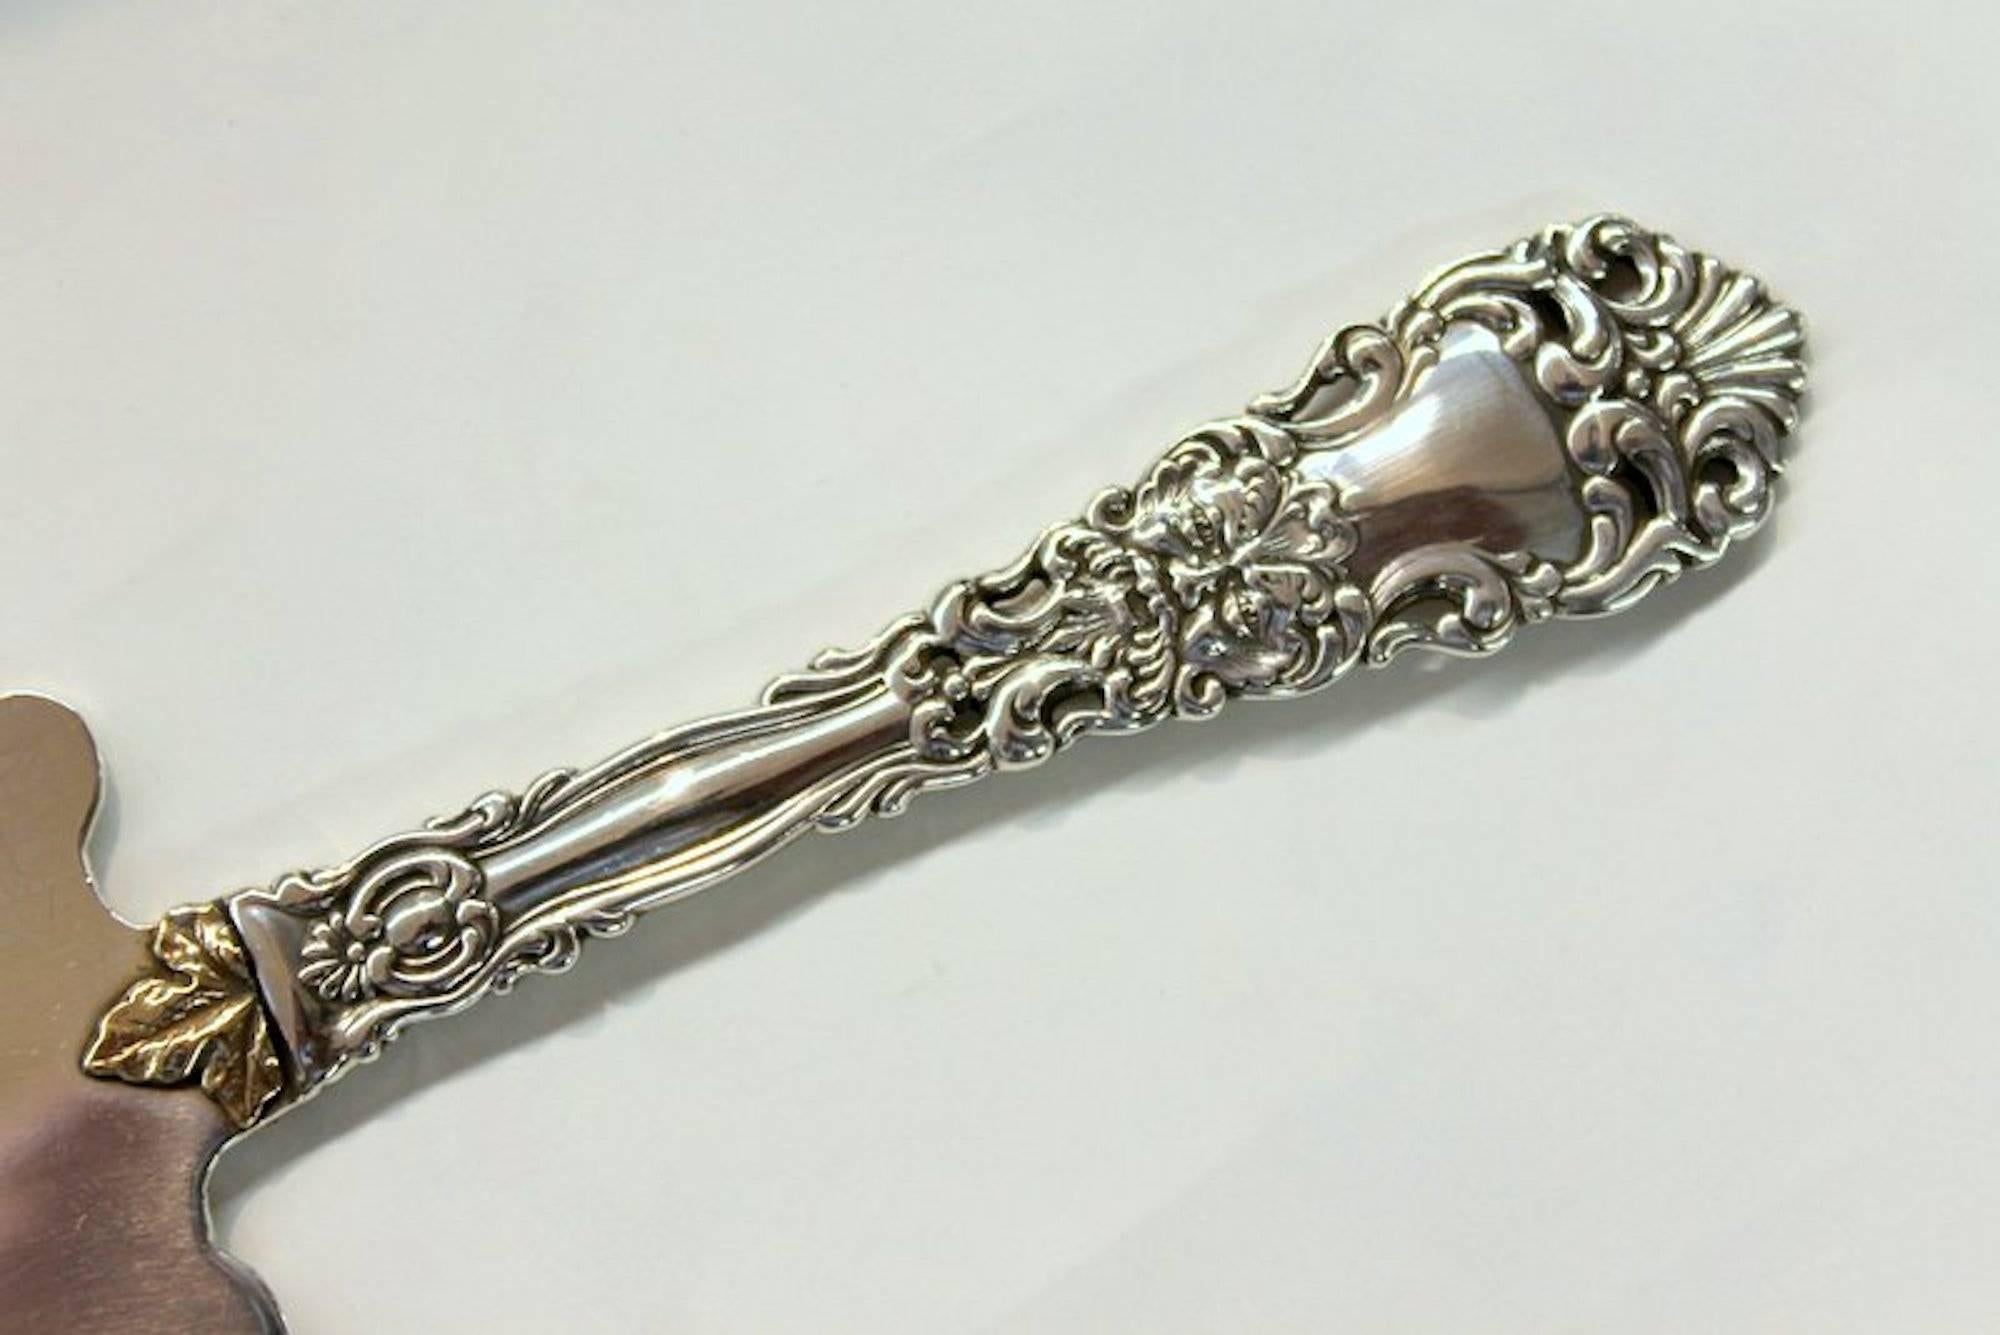 Rare Old American Heavy Cast Sterling Silver Cake Knife, 